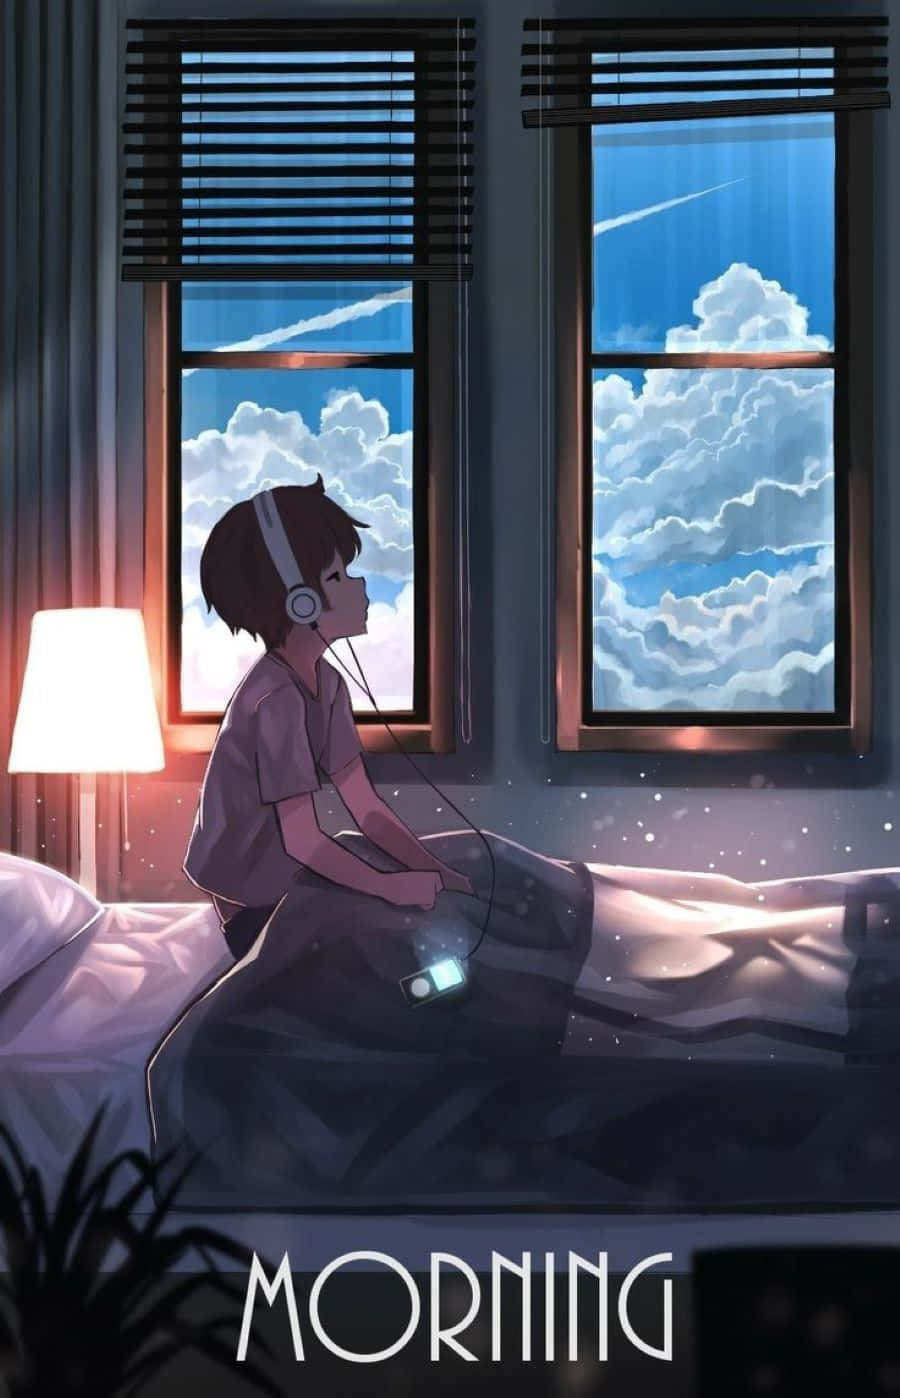 A lonely dark anime figure amidst the night sky Wallpaper